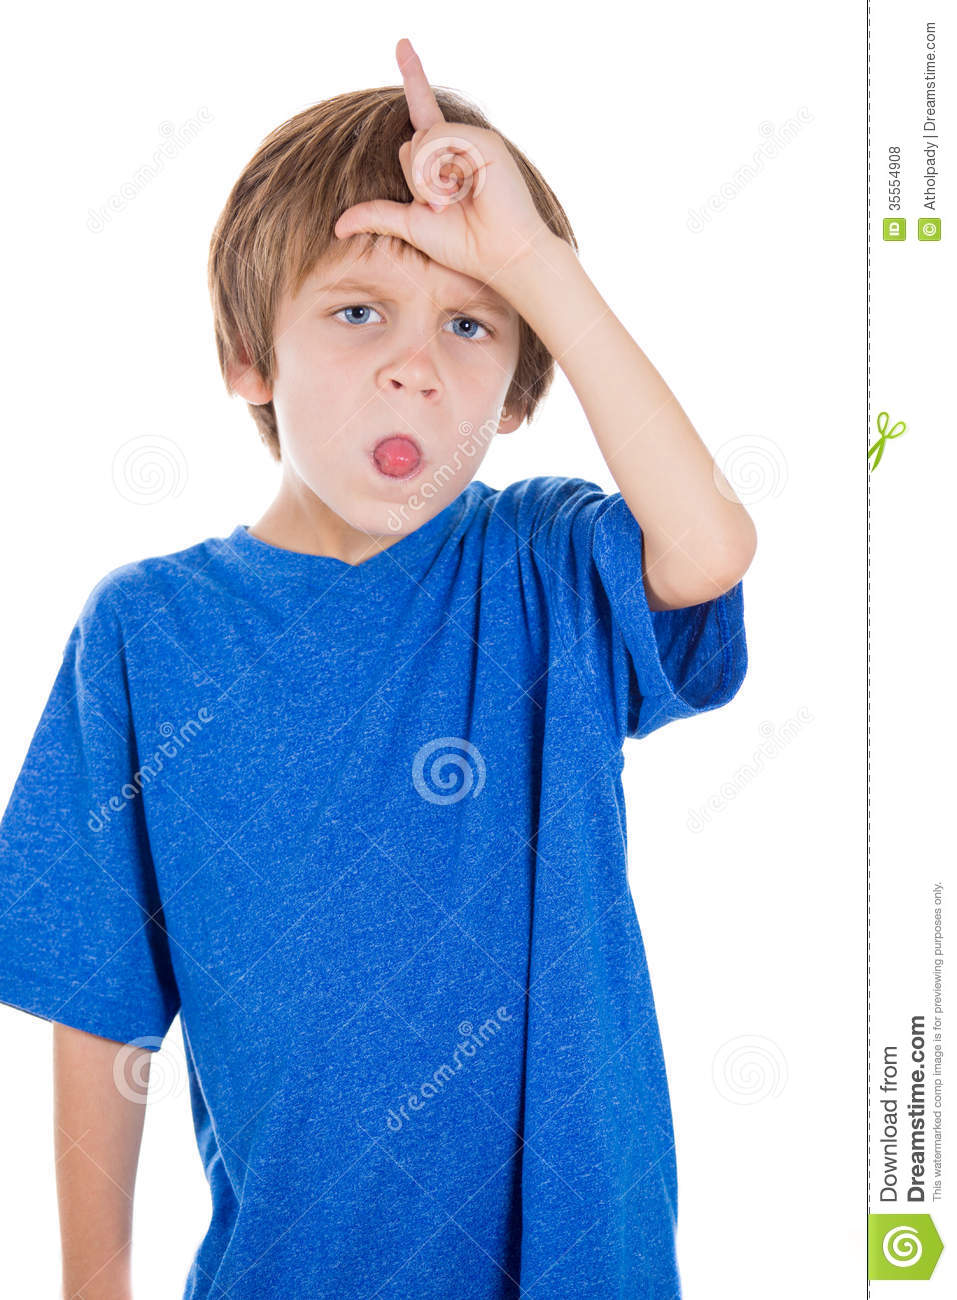 Loser Sign Shown By Cute Adorable Kid Royalty Free Stock Photos